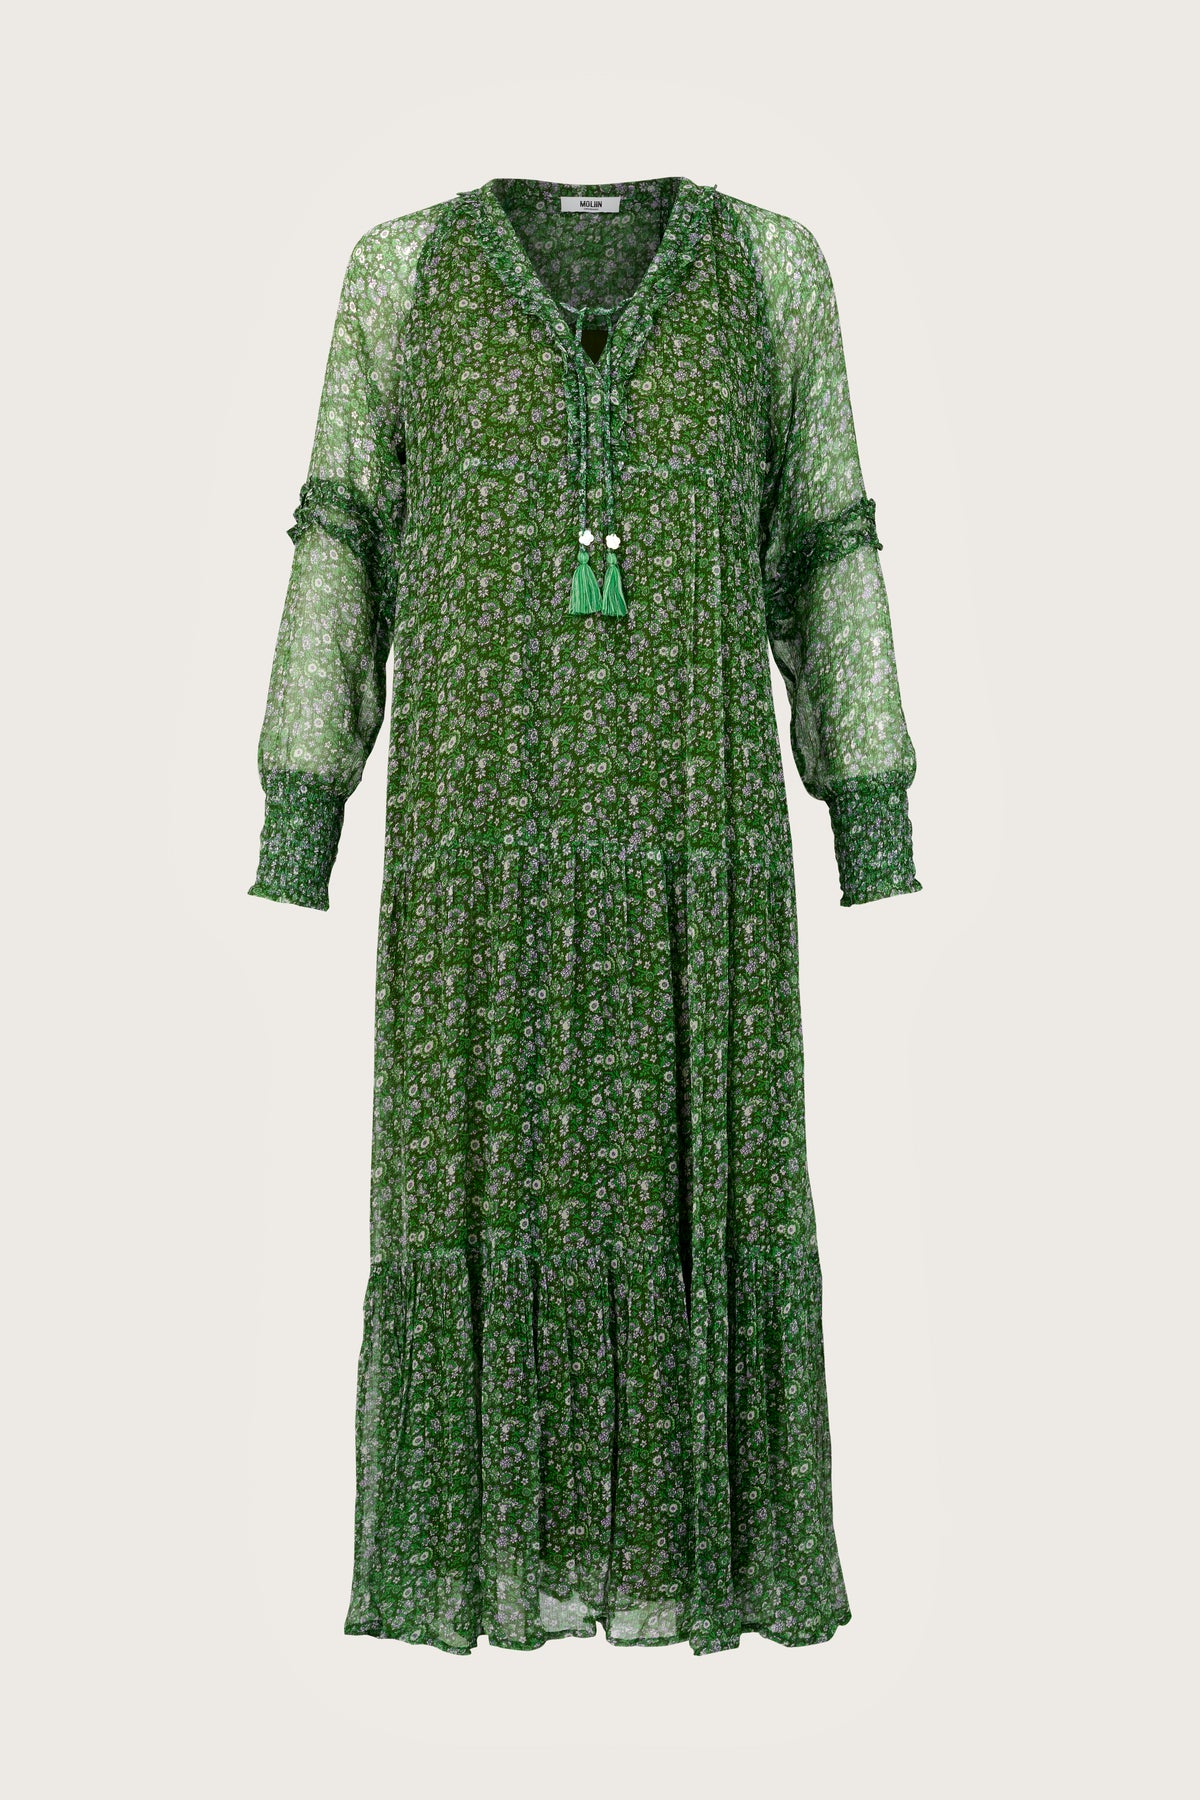 Green floral ditsy print maxi dress with long sheer sleeves and a tiered skirt